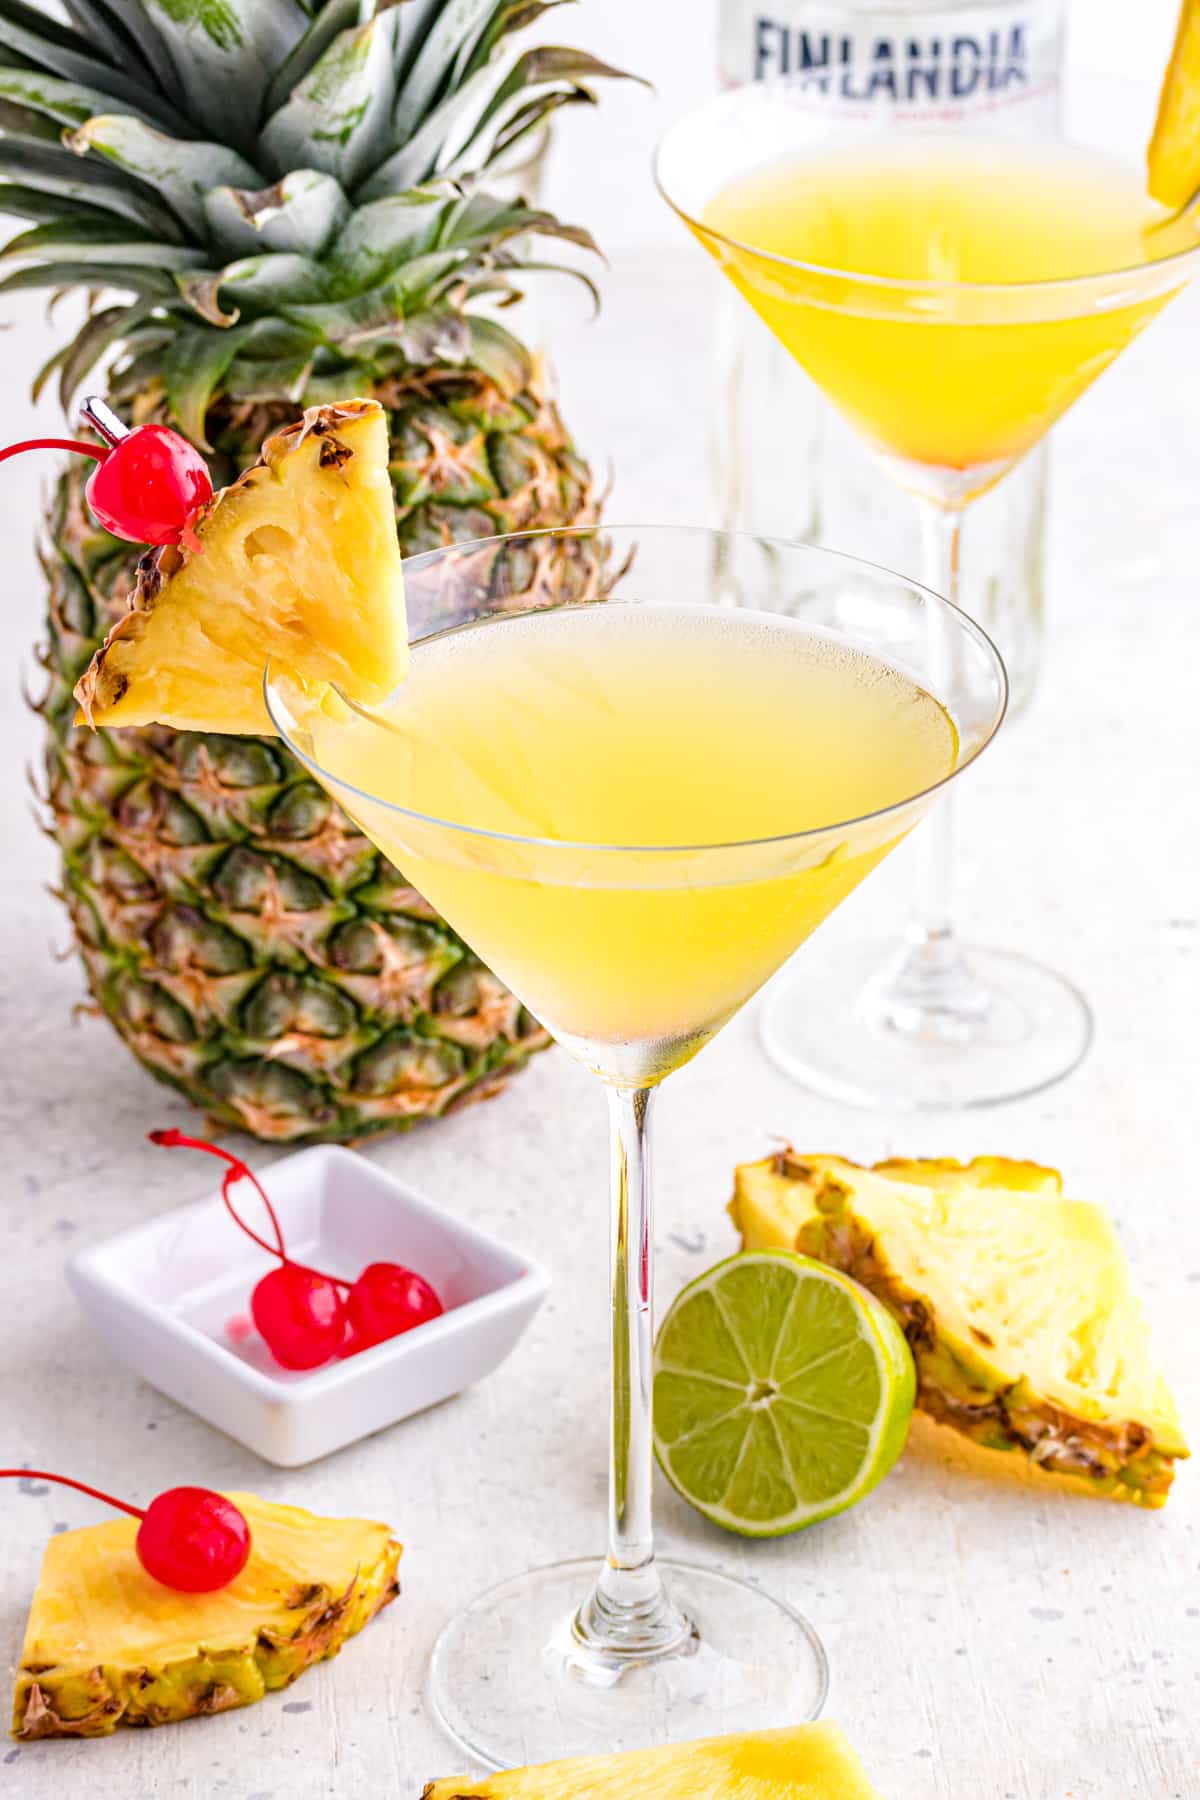 Pineapple martini on table with garnishes.